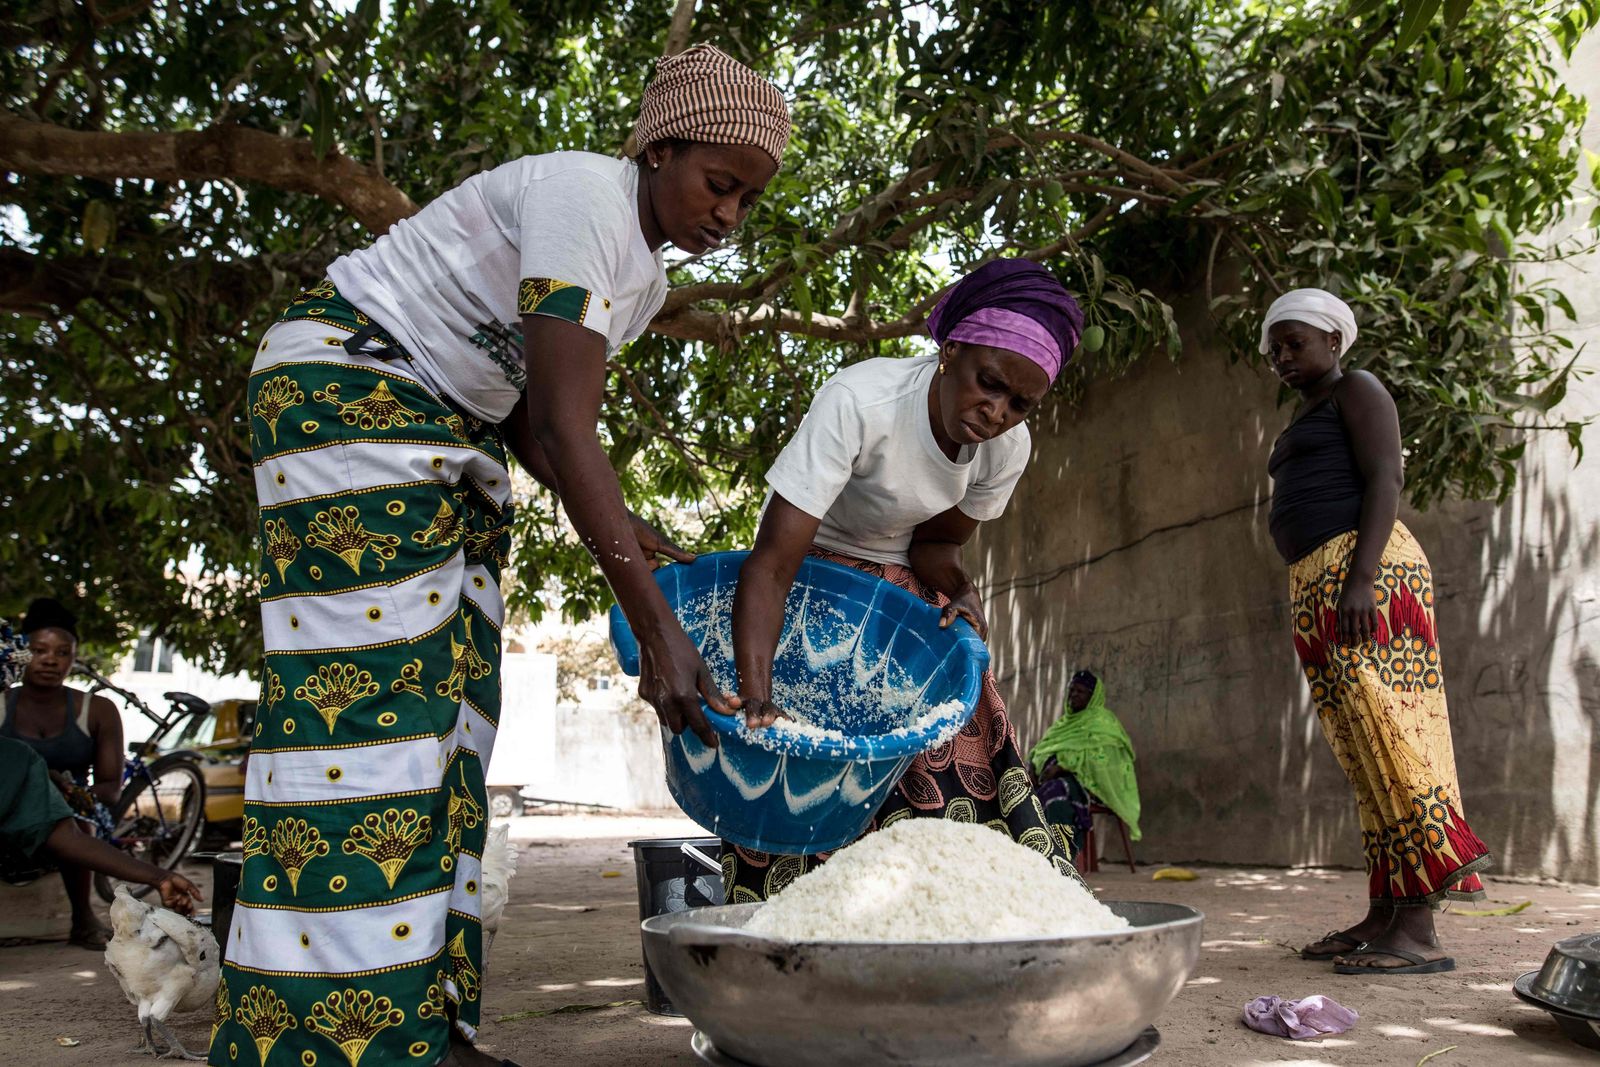 Two internally displaced women prepare food in the village of Bujinha on March 15, 2022. - On Sunday March 13, 2022, Senegal launched a military operation against the Movement of Democratic Forces of Casamance (MFDC) separatists along the border Senegal and Gambia displacing hundreds of Senegalese and Gambian families into Gambia. (Photo by MUHAMADOU BITTAYE / AFP) - AFP